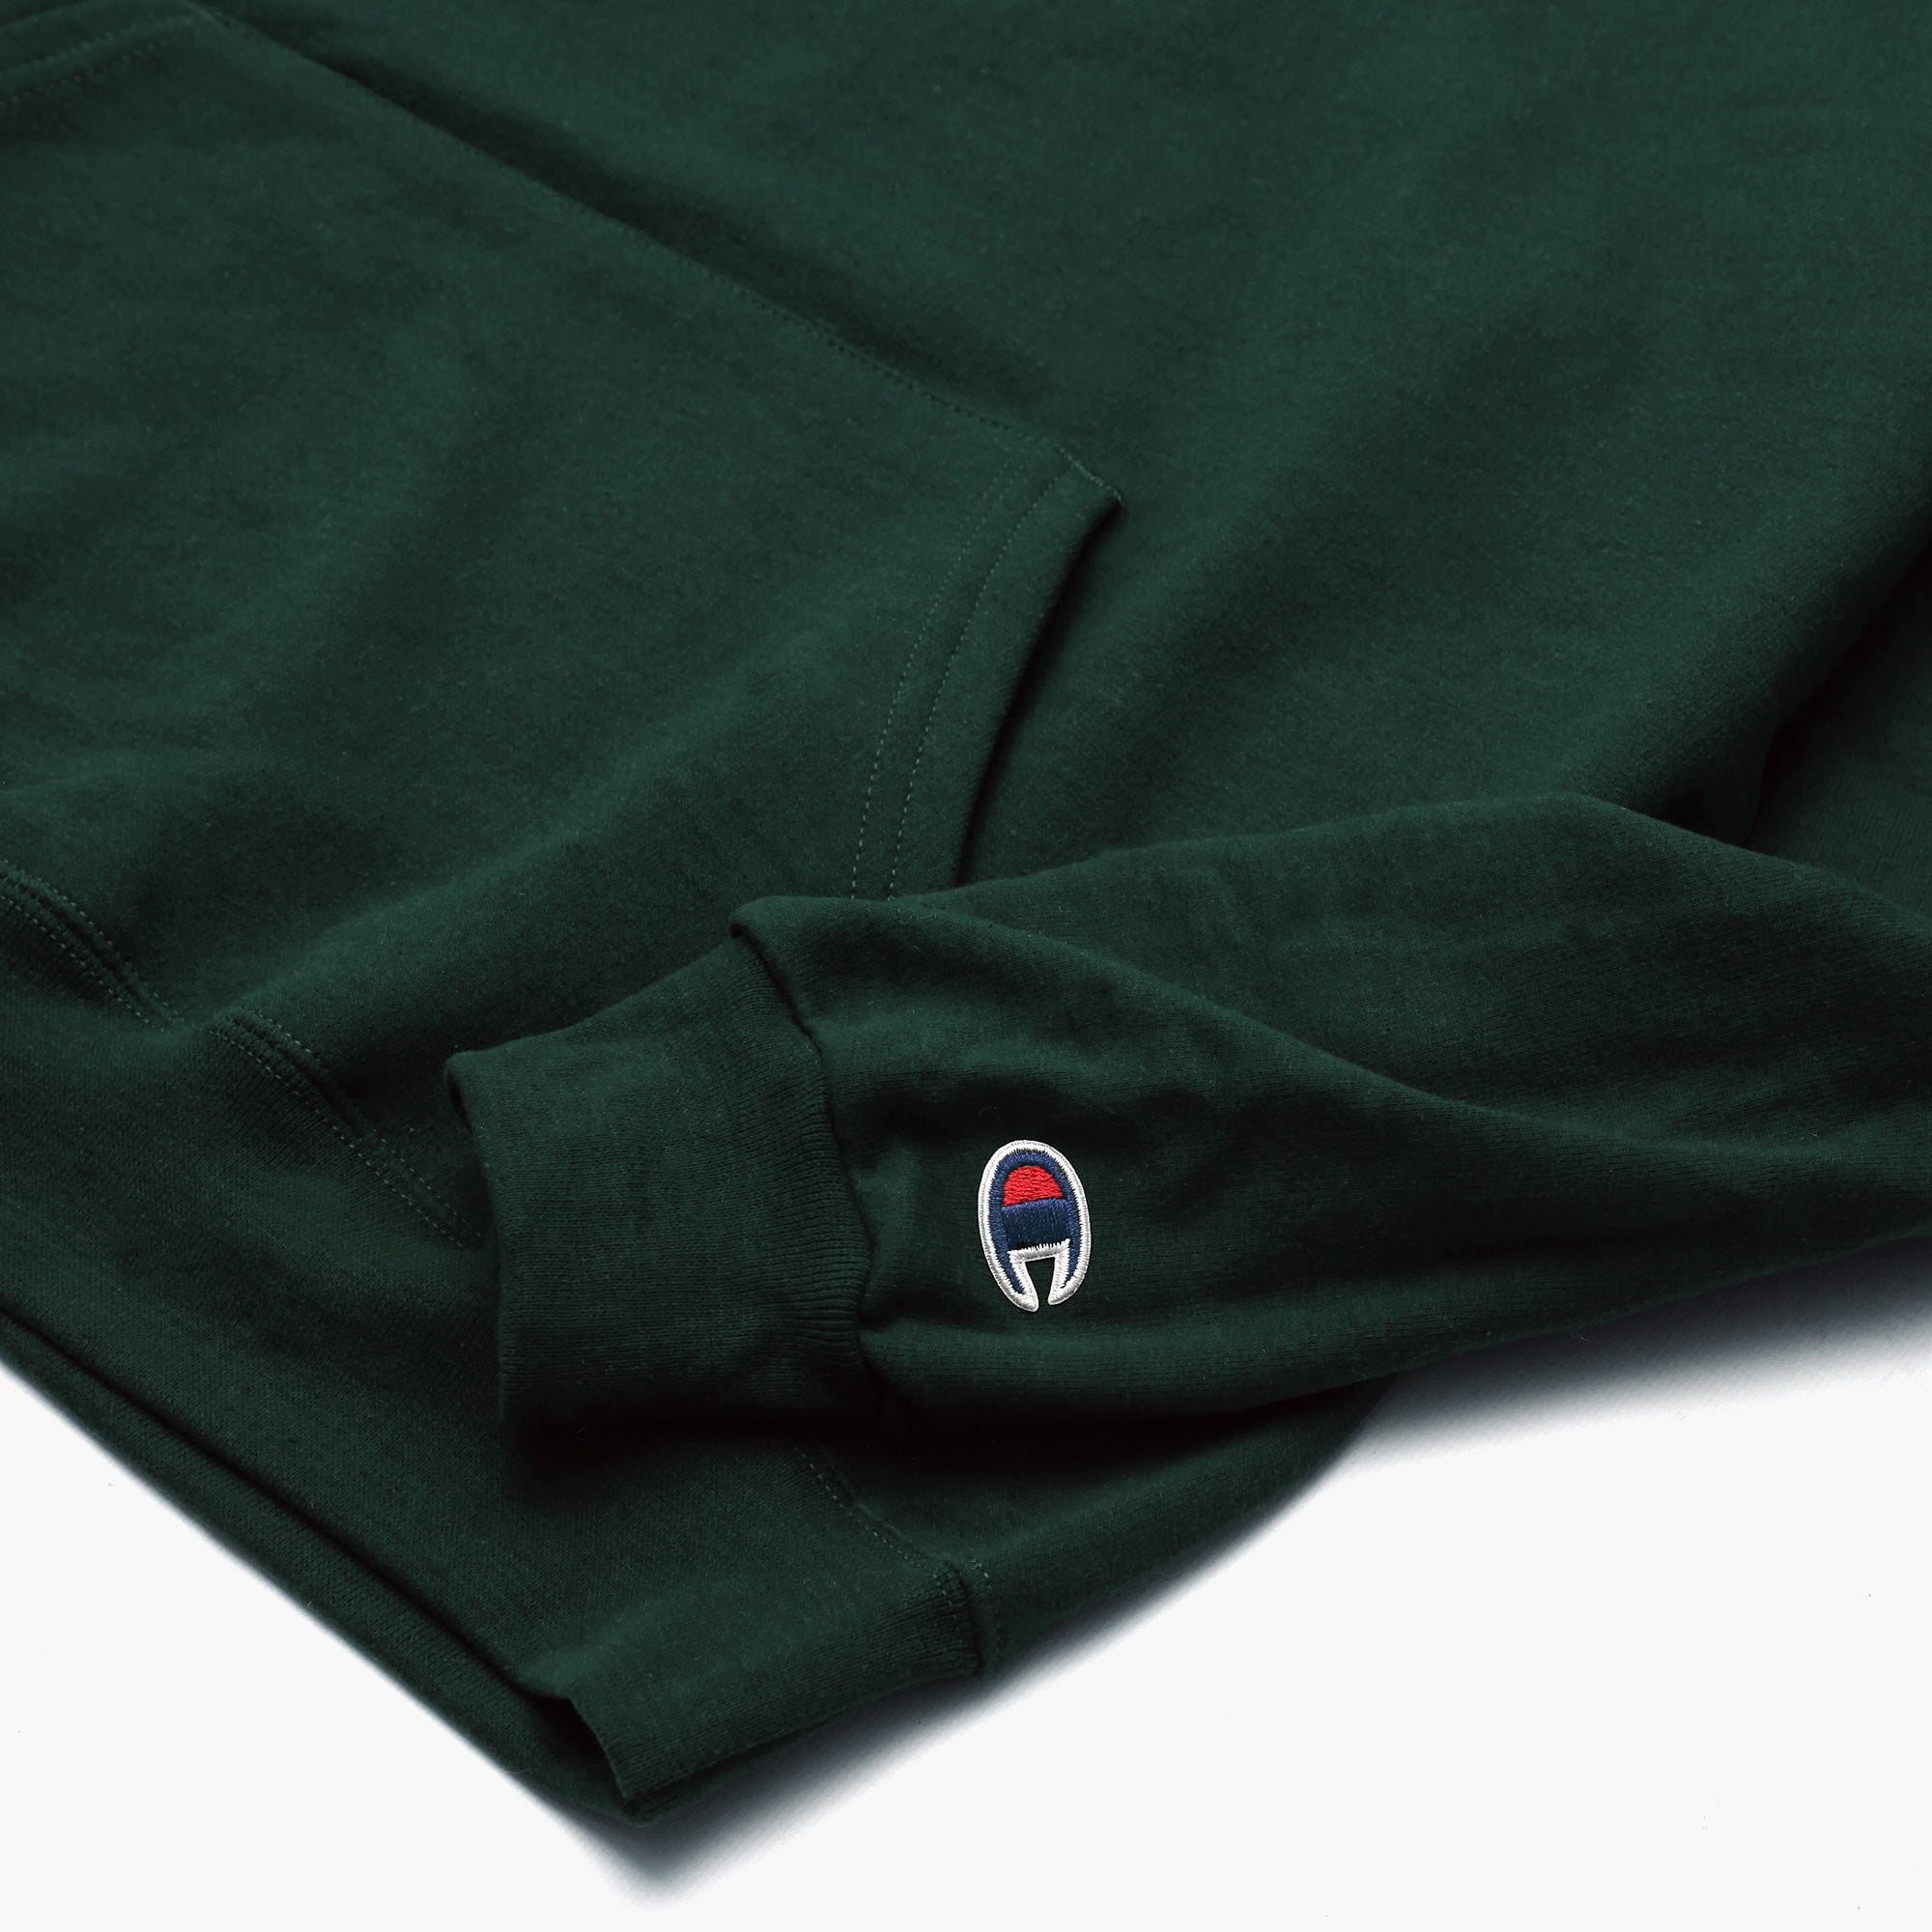 forest green champion hoodie